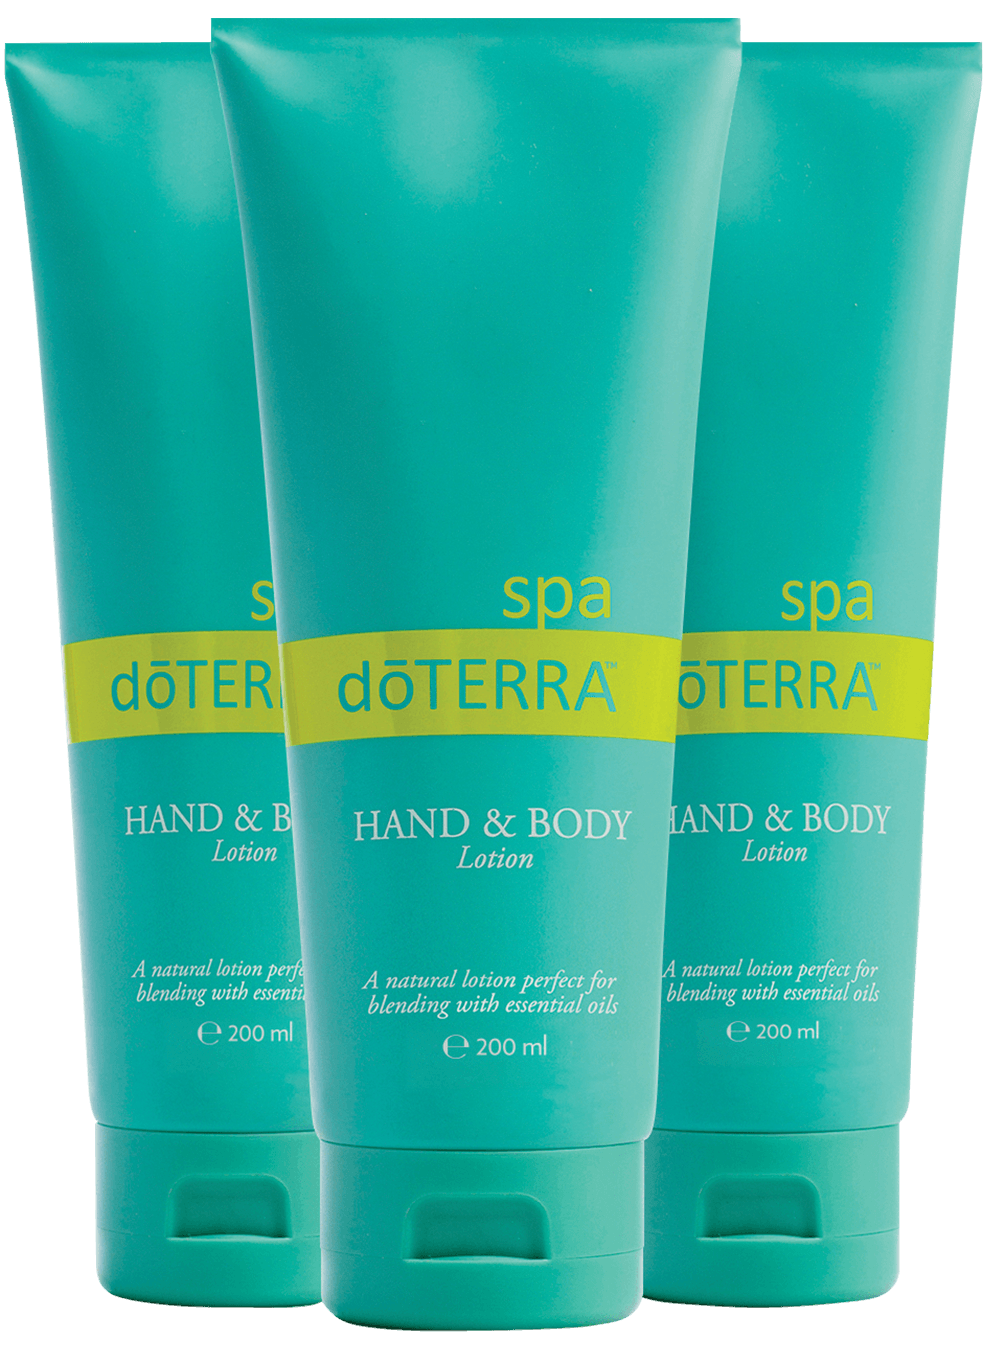 https://shop.doterra.com/custom/europe/images/products/personal-care/spa/hand-body-lotion-3pk-large-987x1350px-eu.png